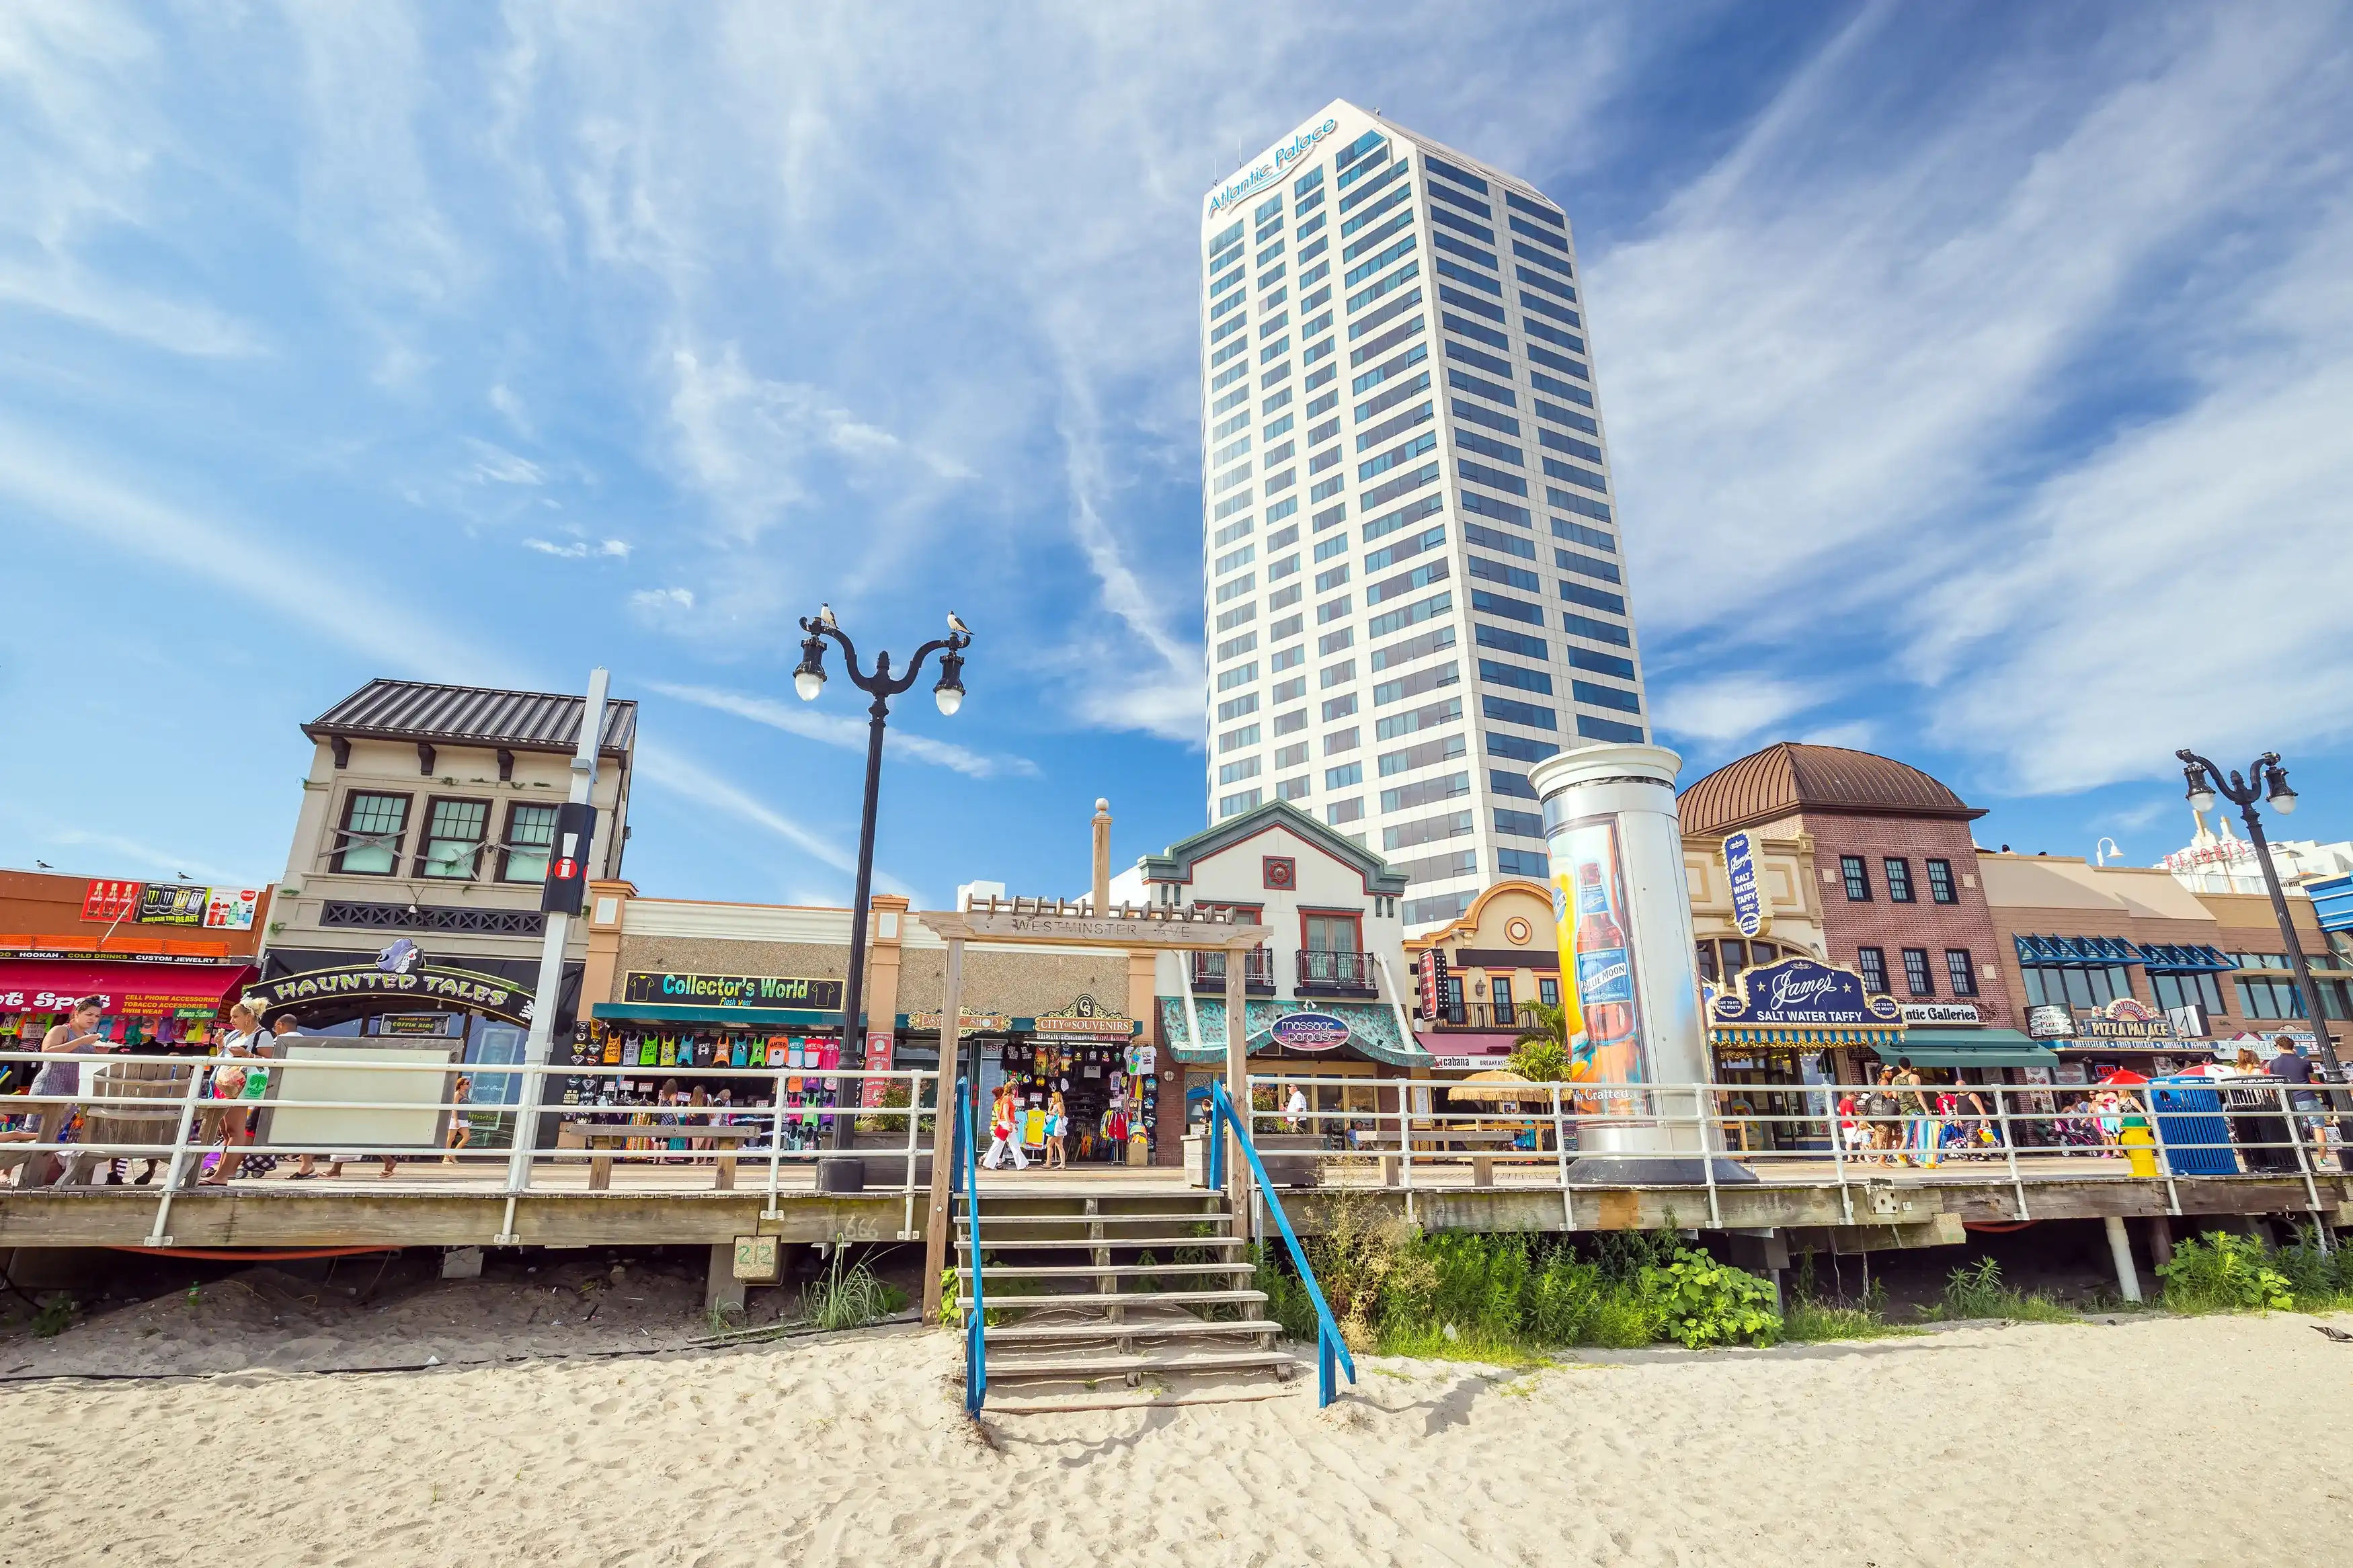 Best Atlantic City hotels. Cheap hotels in Atlantic City, New Jersey, United States